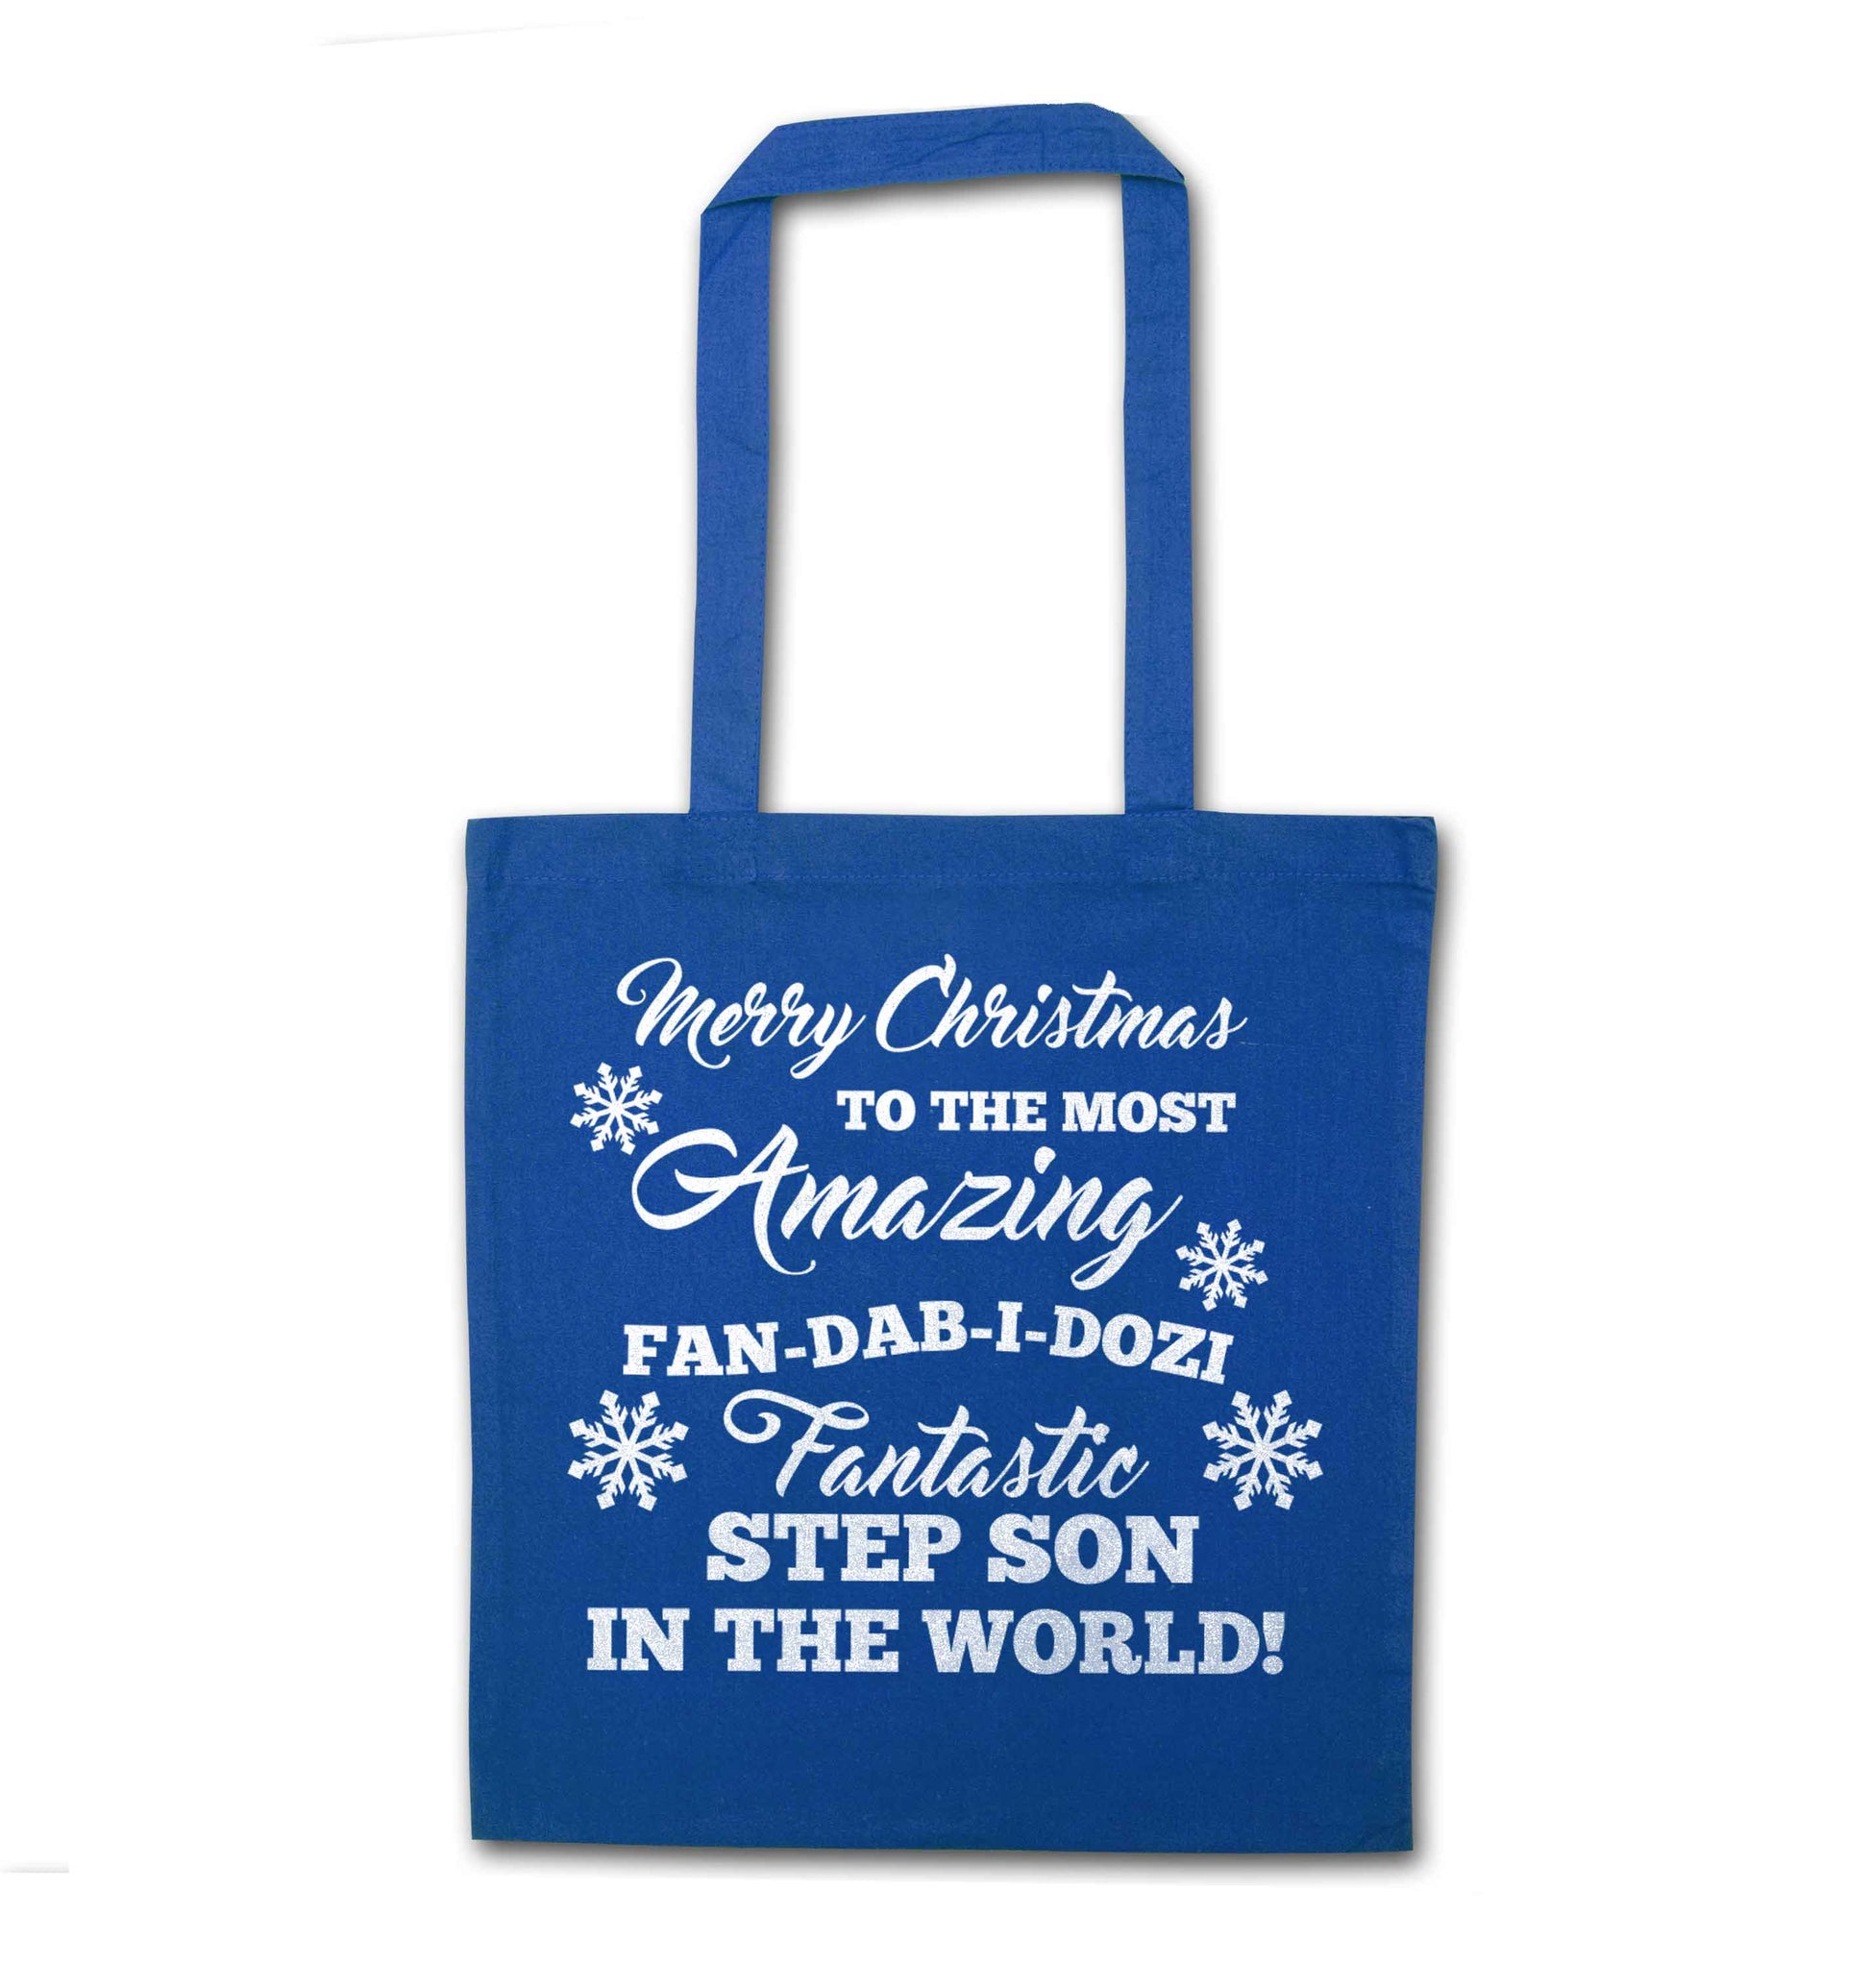 Merry Christmas to the most amazing fan-dab-i-dozi fantasic Step Son in the world blue tote bag